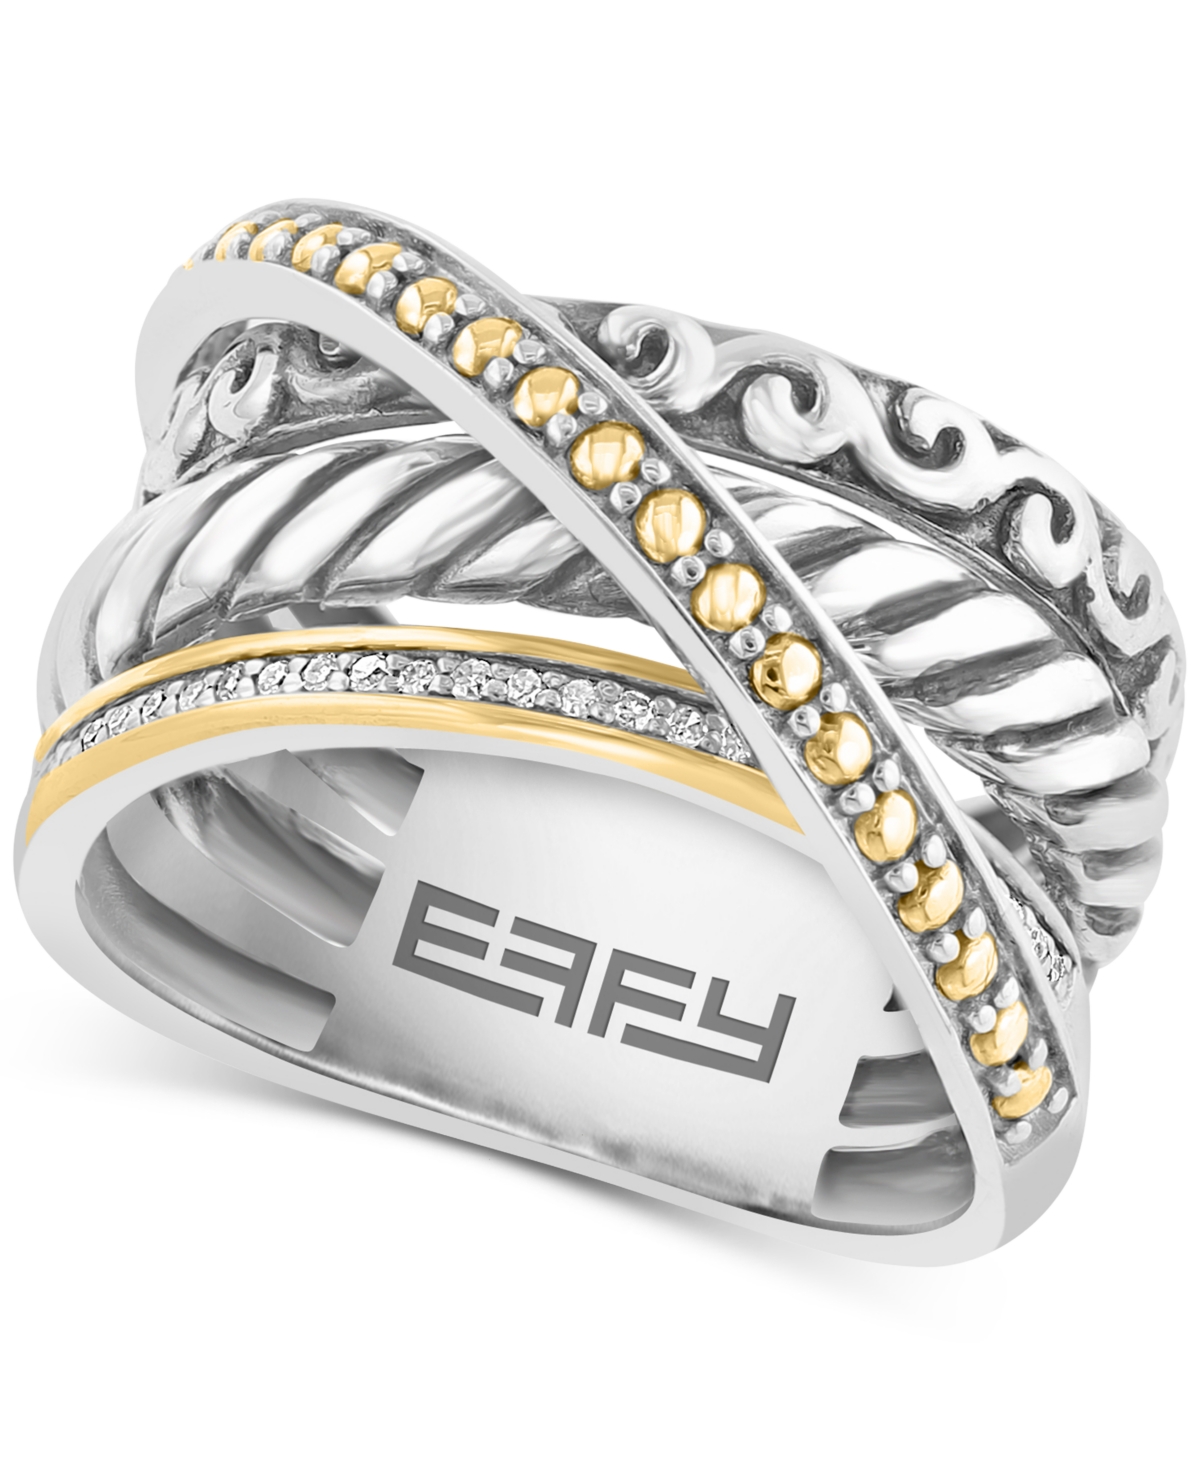 Effy Diamond Crossover Statement Ring (1/10 ct. tw.) in Sterling Silver & 18k Gold-Plate - K Yellow Gold Over Sterling Silver